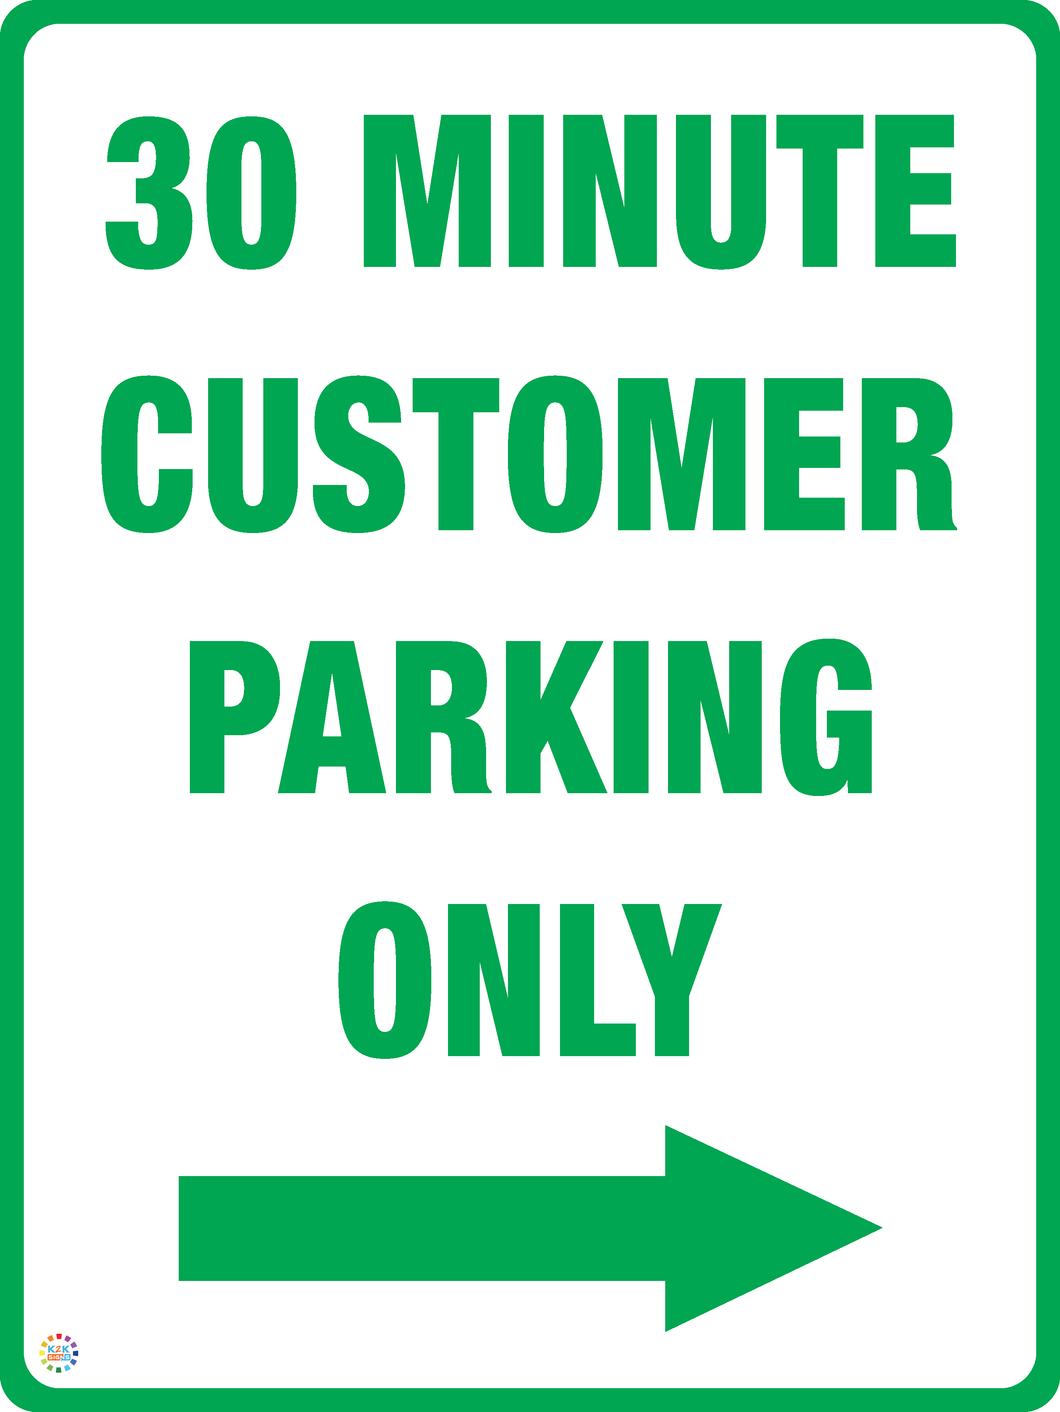 30 Minute Customer Parking Only - Right Arrow Sign